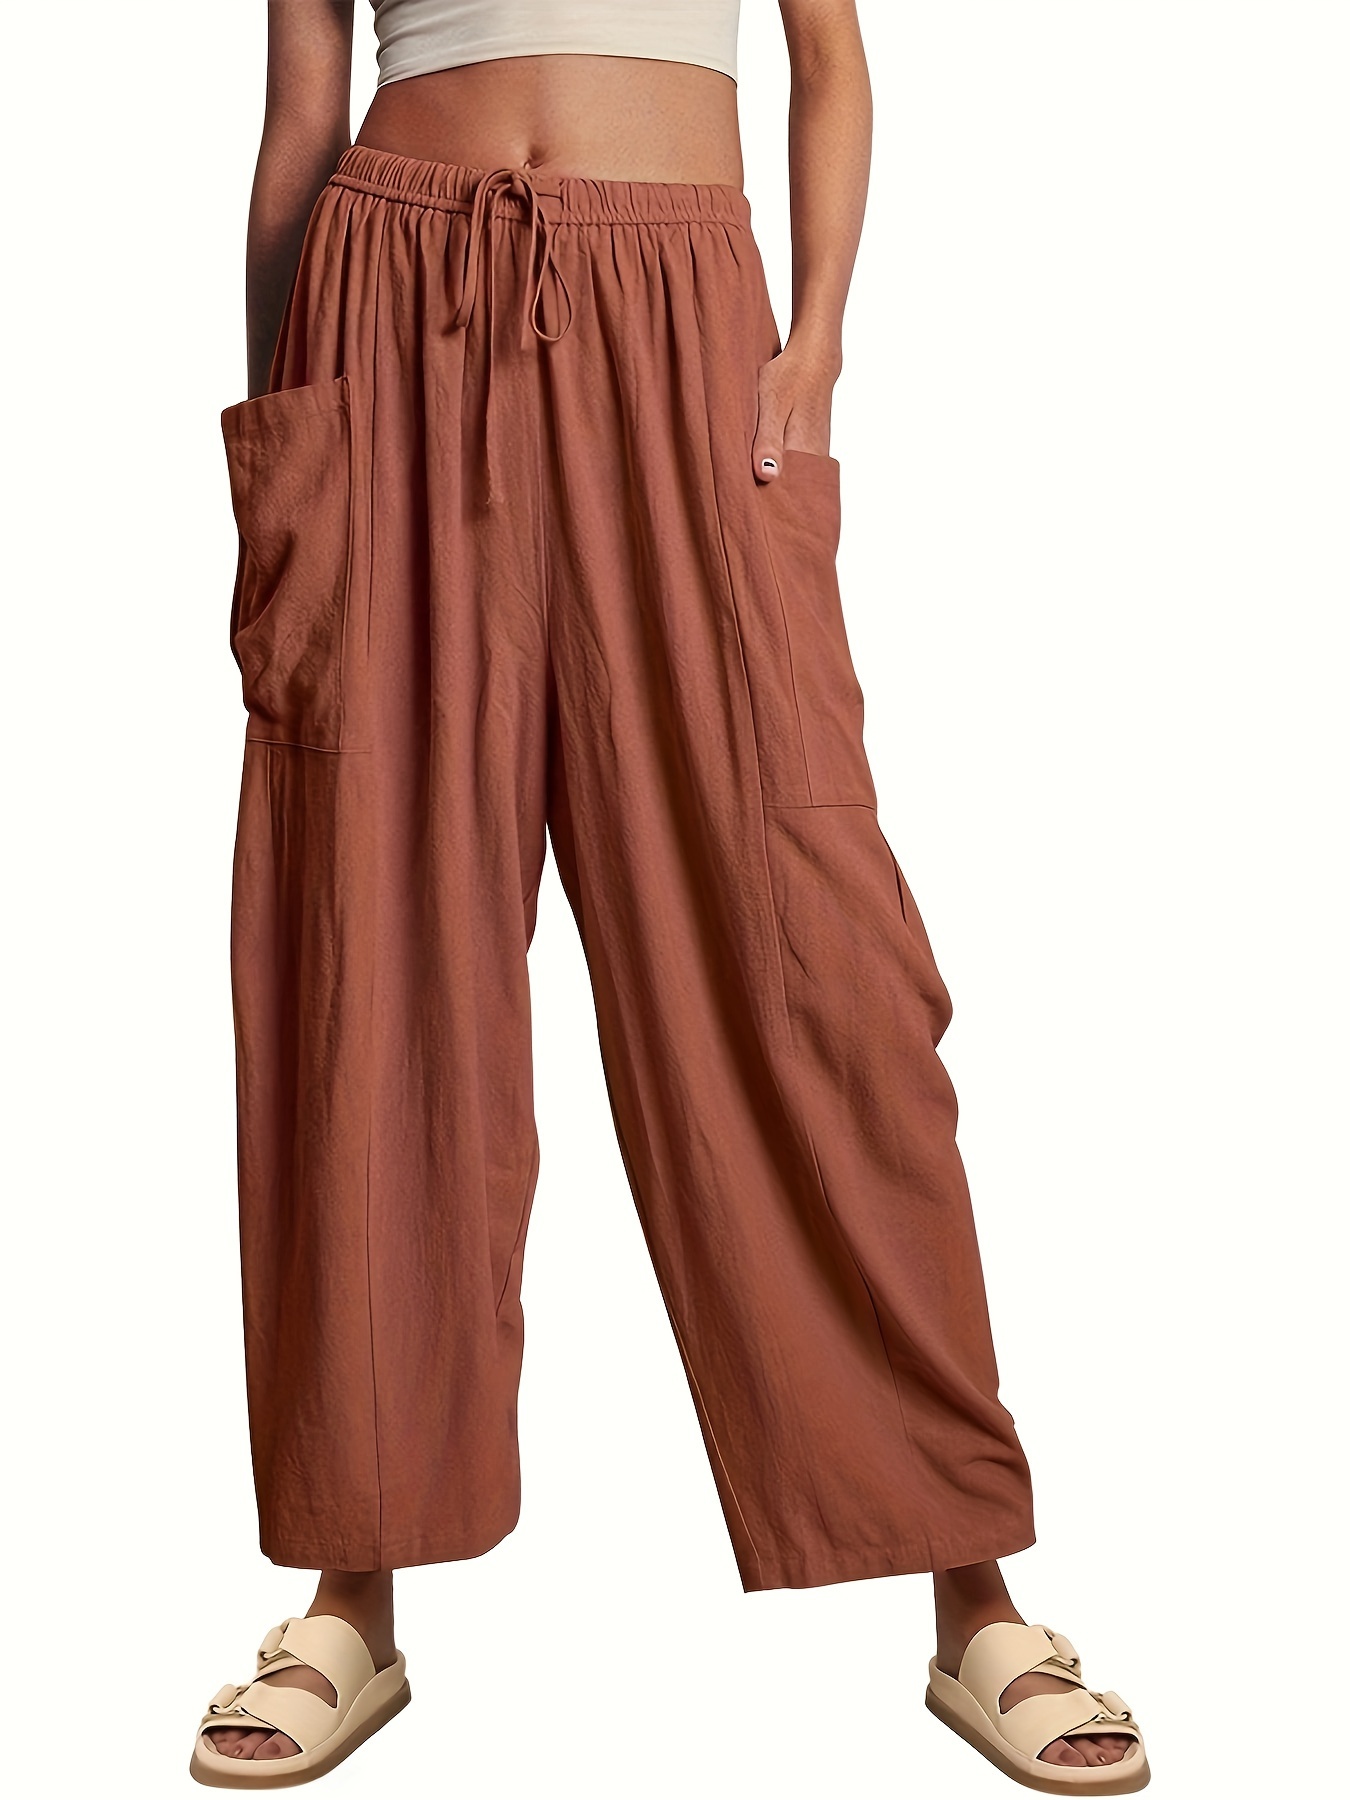  Women's Cotton Long Pants Wide Leg Pants Elegant Tiered Trouser  Summer Beach Pants Casual Loose Harem Pants for Outdoor Apricot S :  Clothing, Shoes & Jewelry